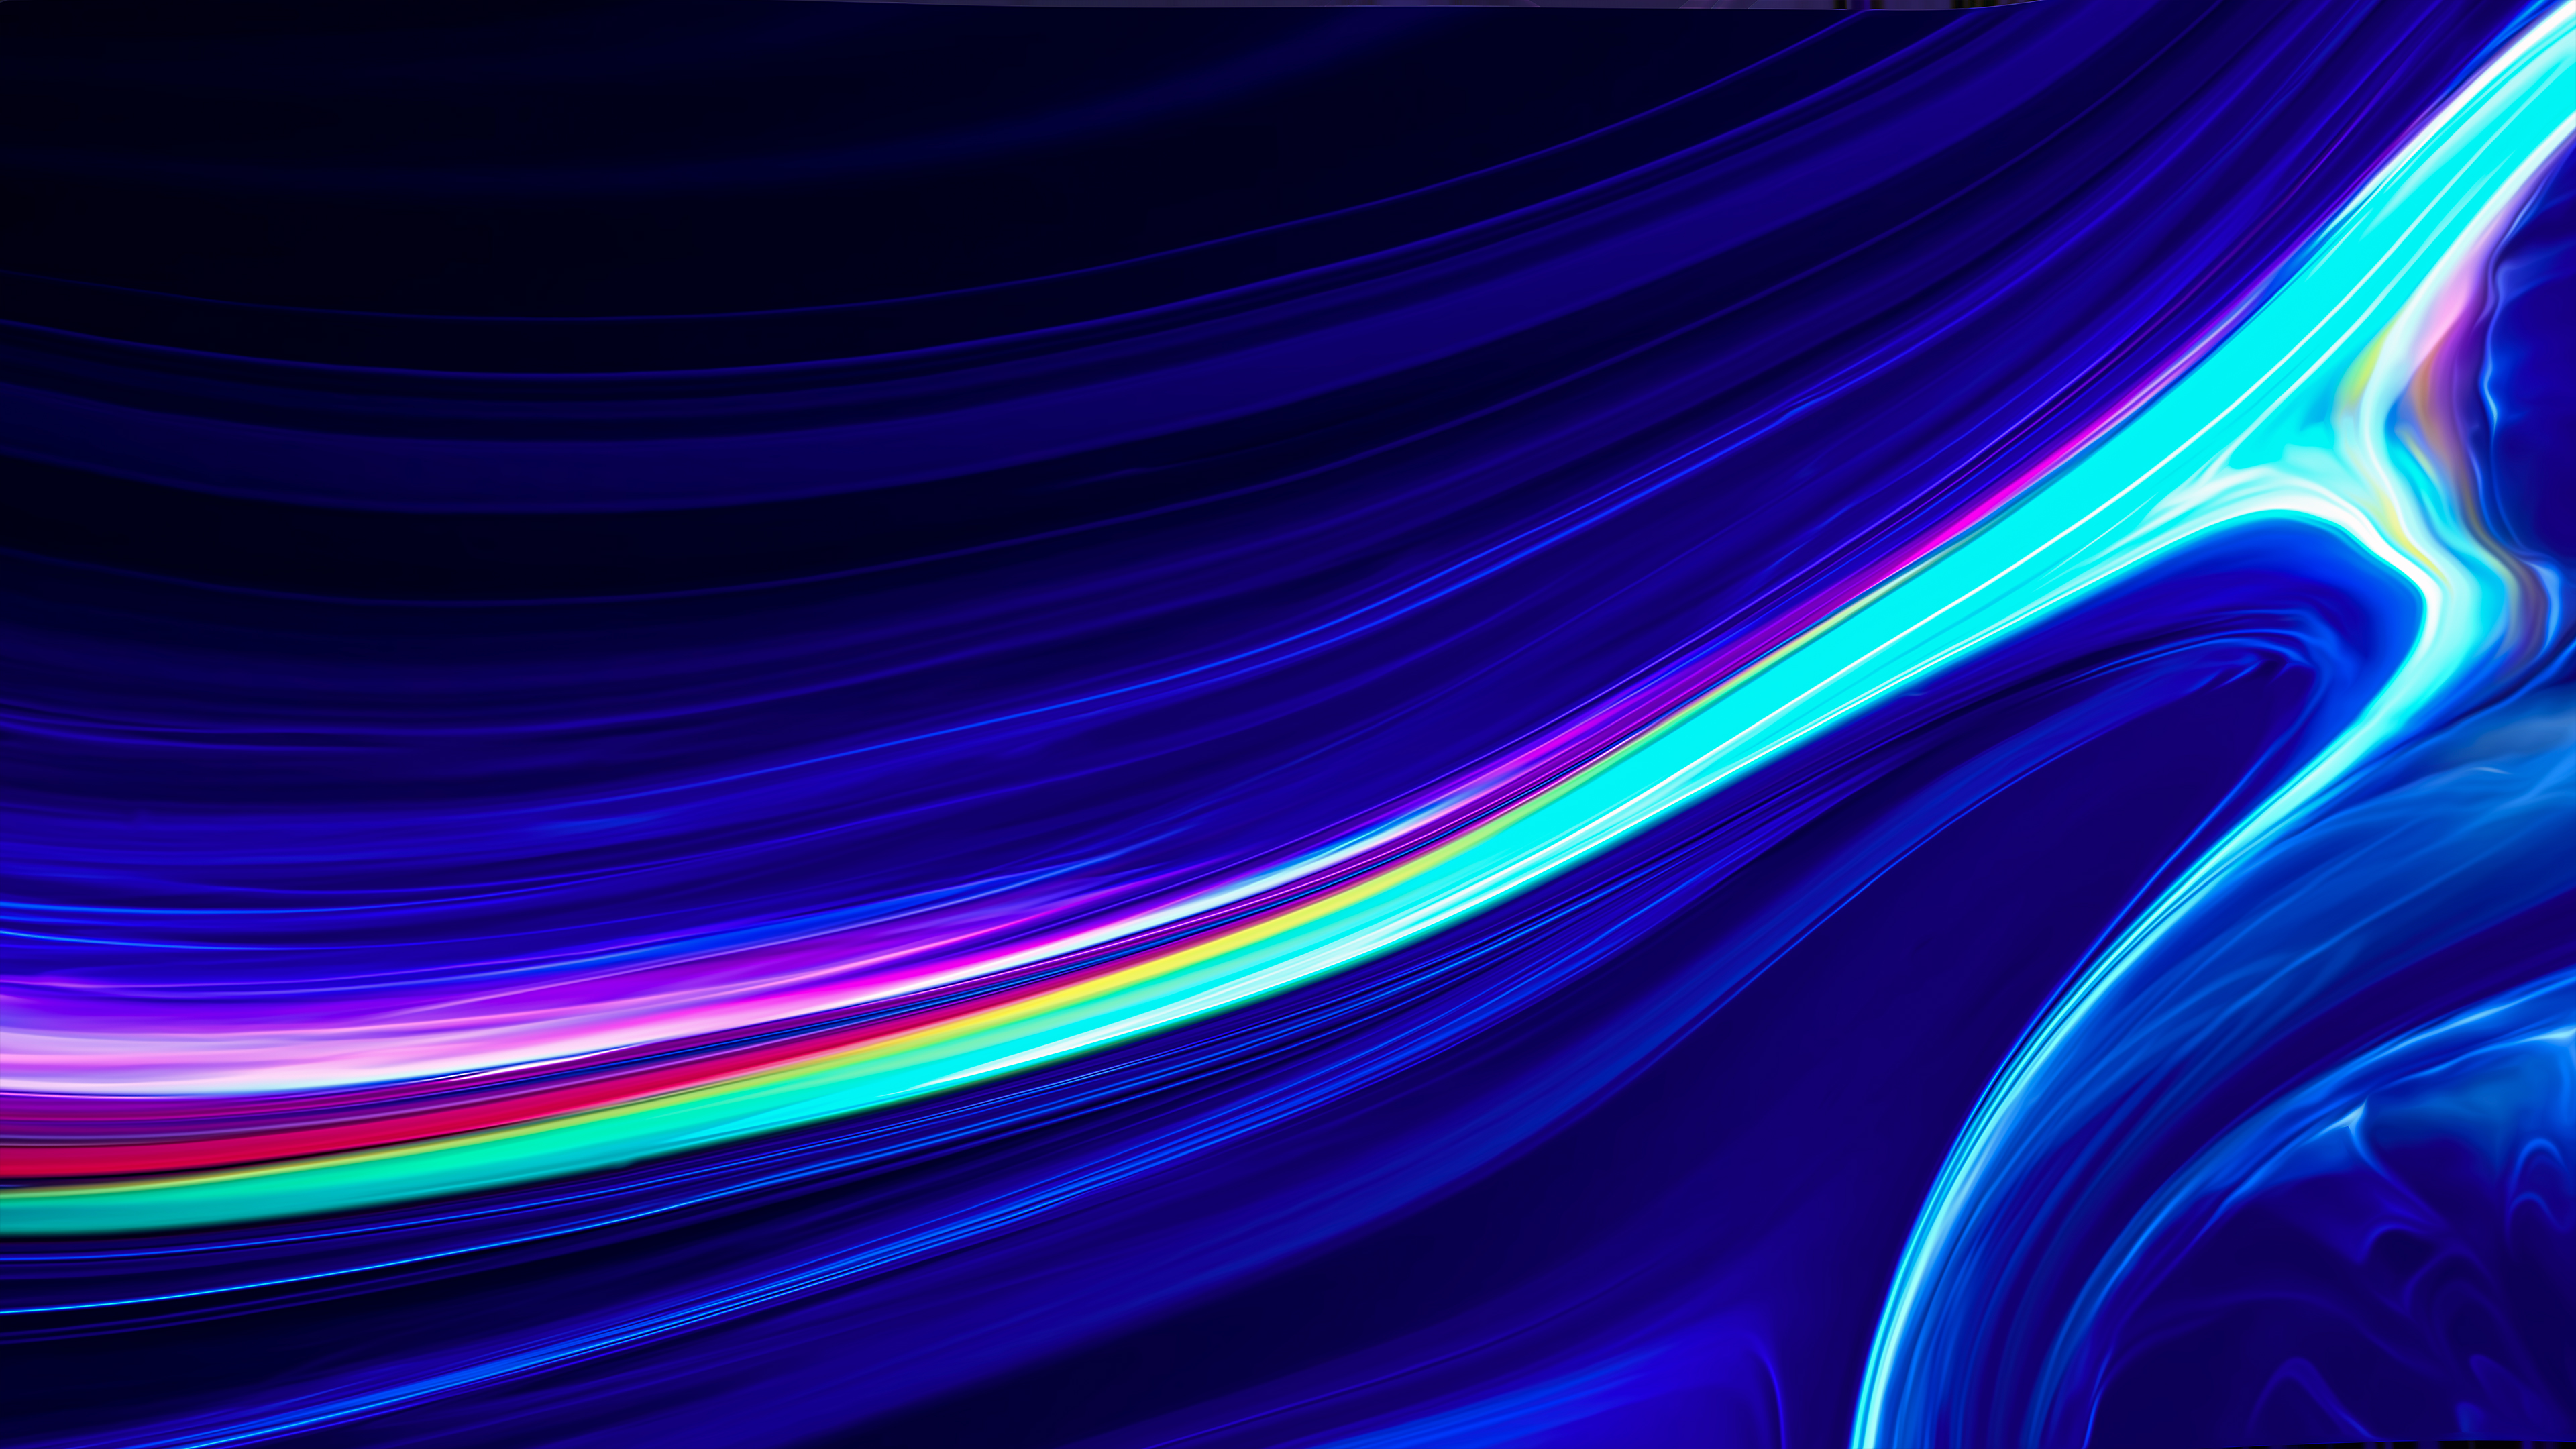 Abstract Blue Led 4k Wallpaper,HD Abstract Wallpapers,4k Wallpapers